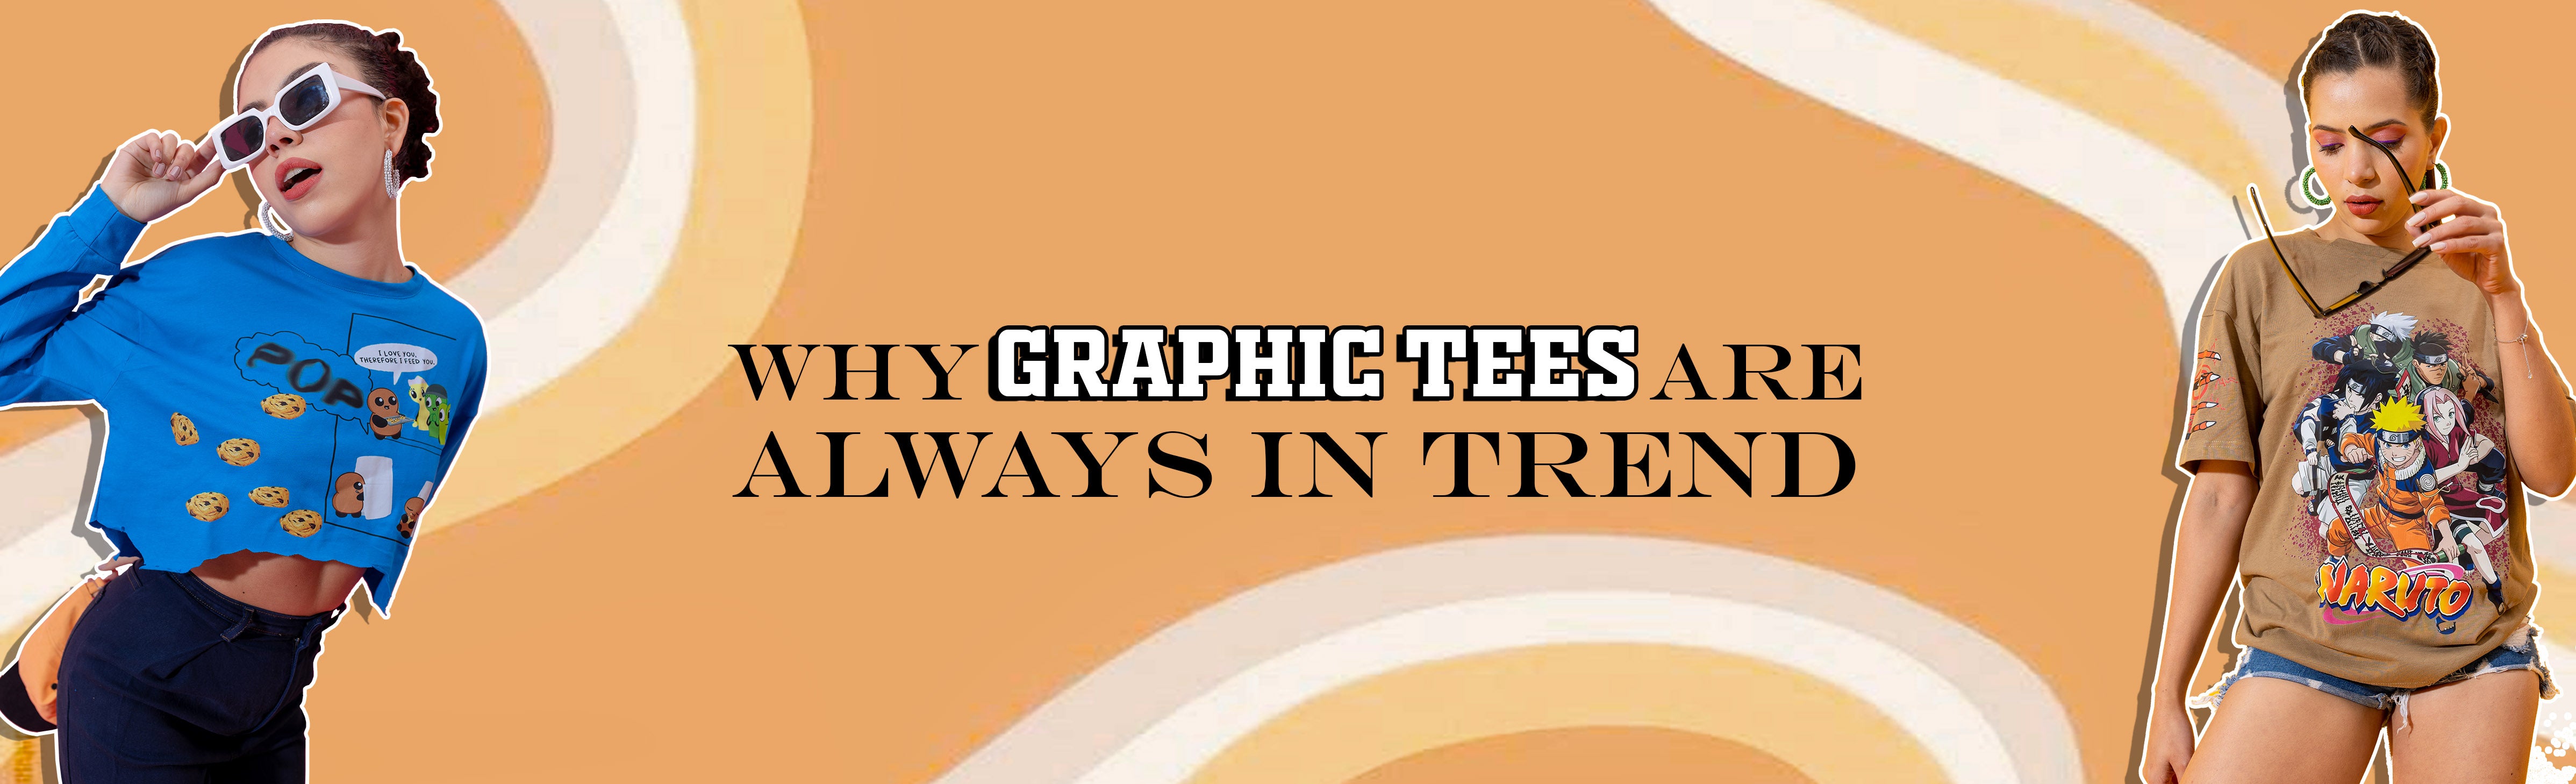 Why graphic tees are always in trend